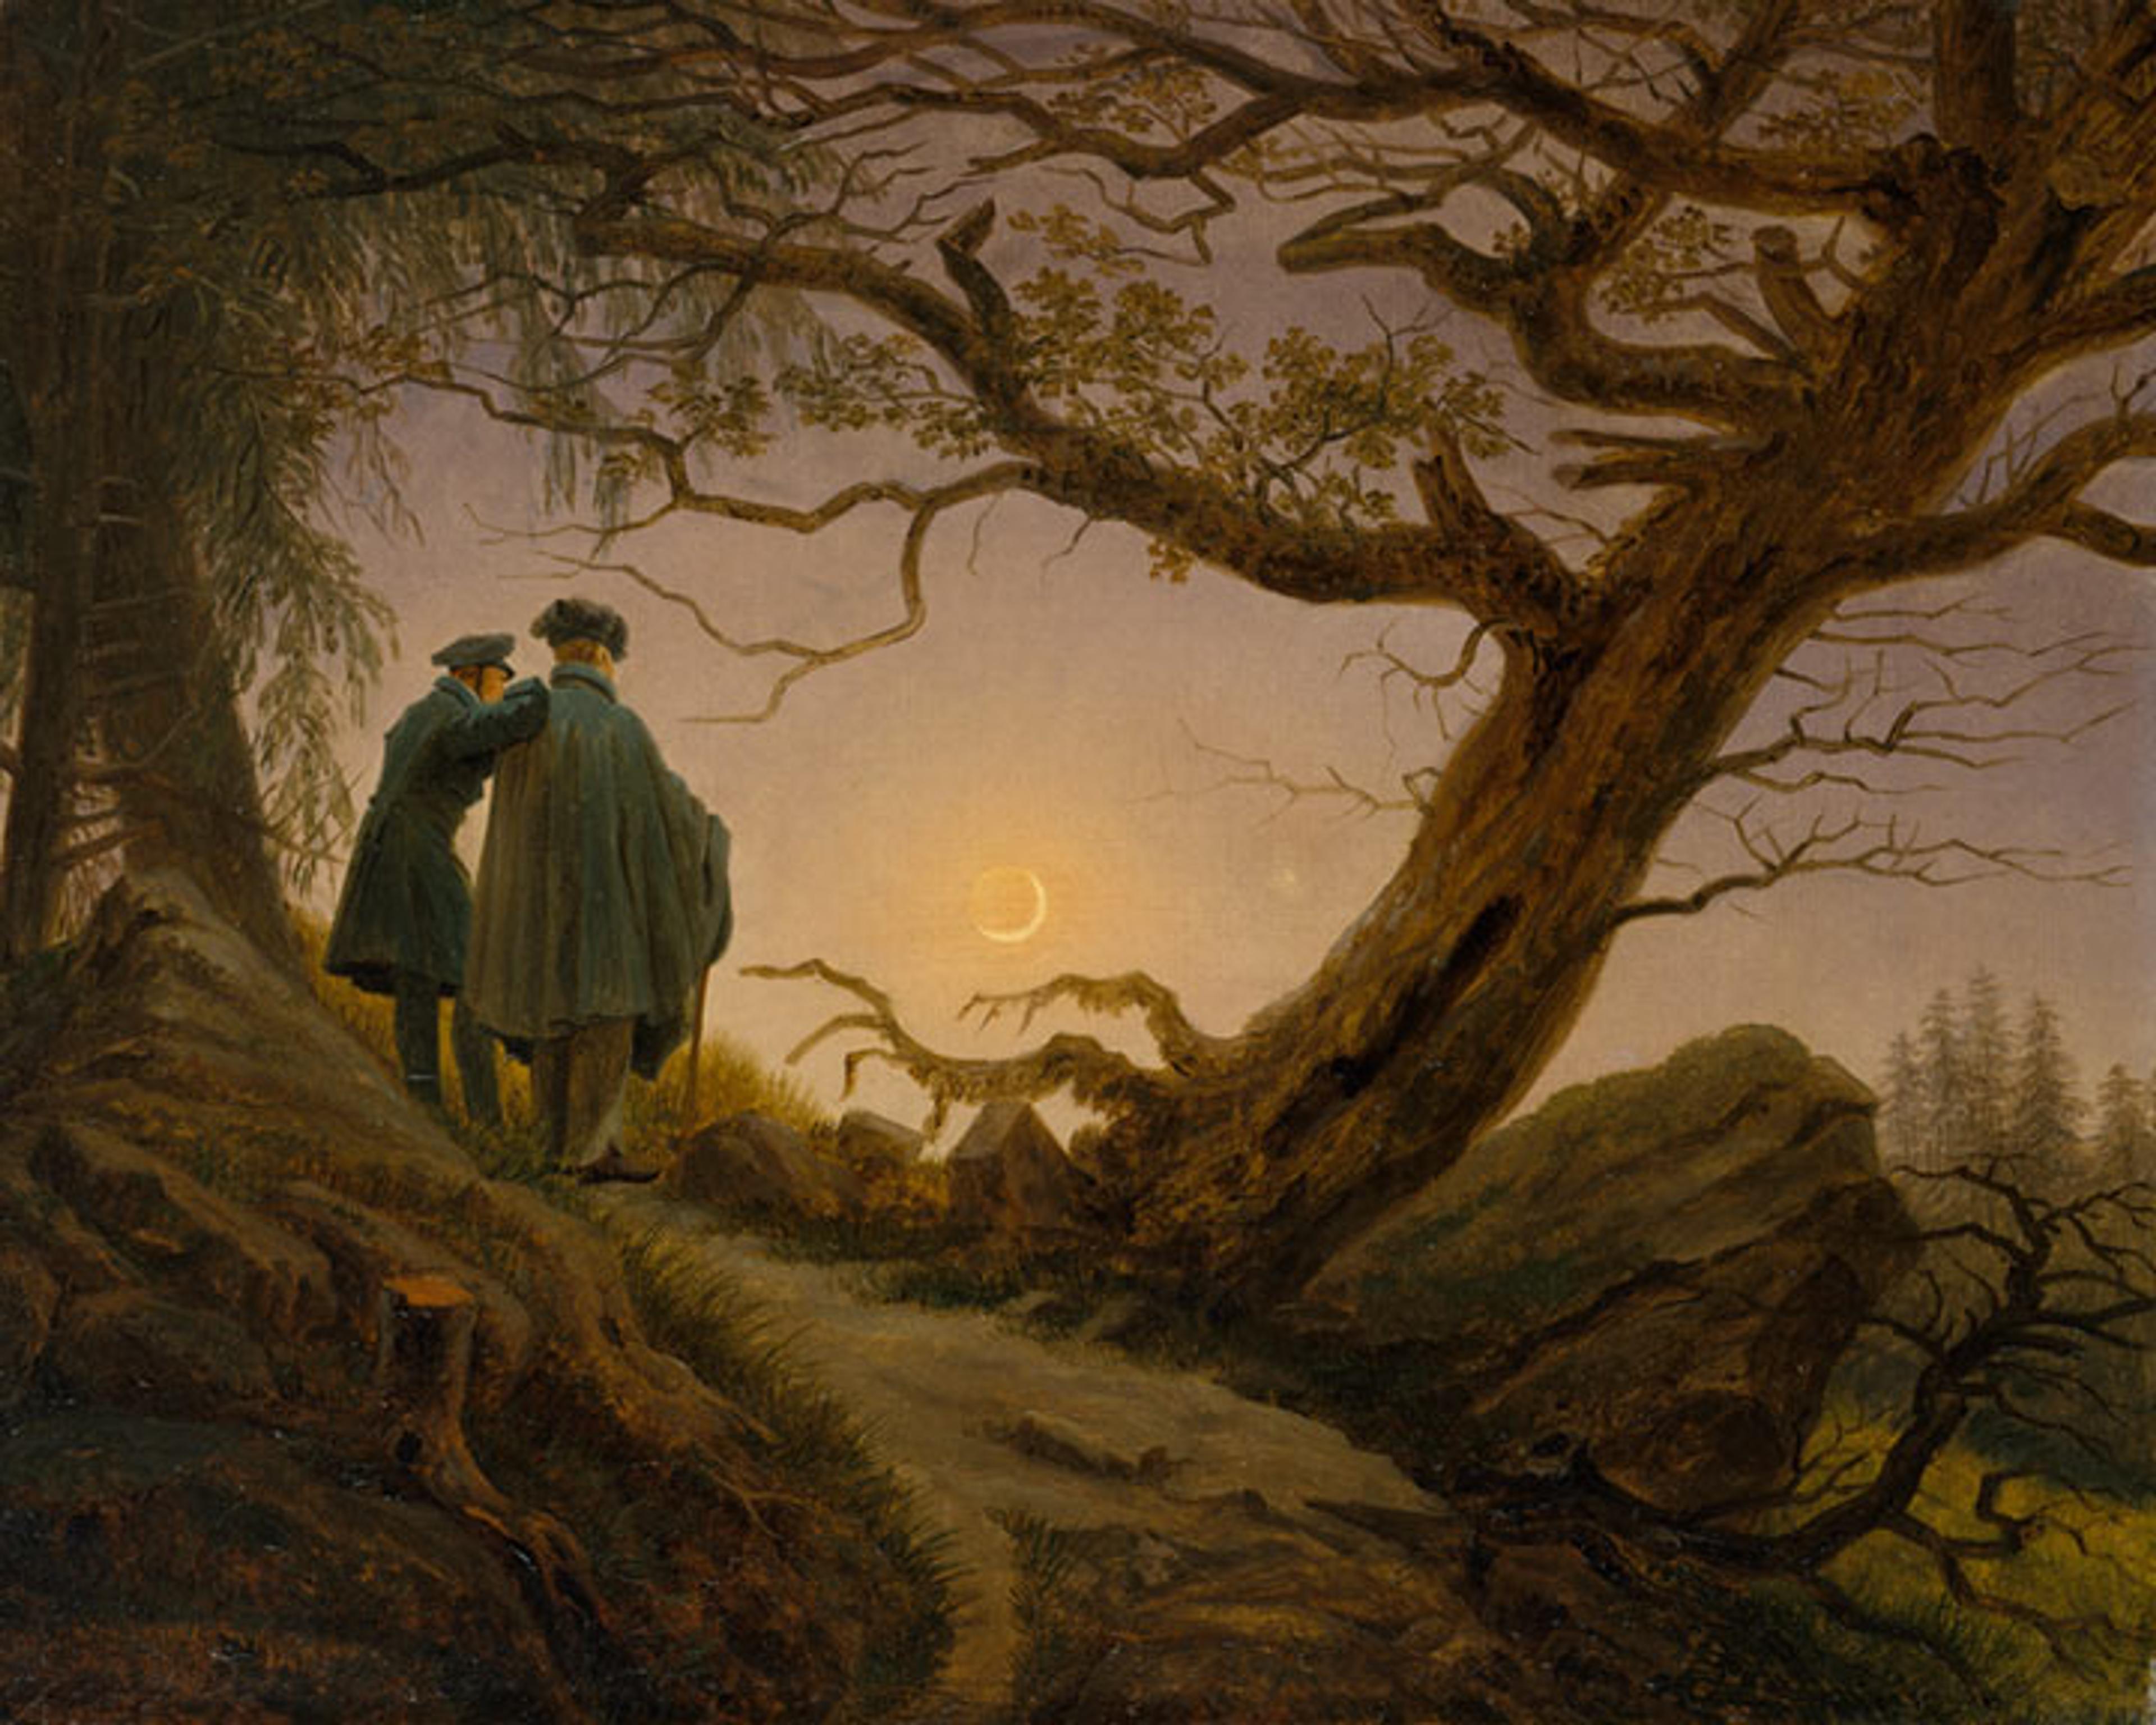 A painting of two men standing in a forest during the late afternoon, with a leafless tree